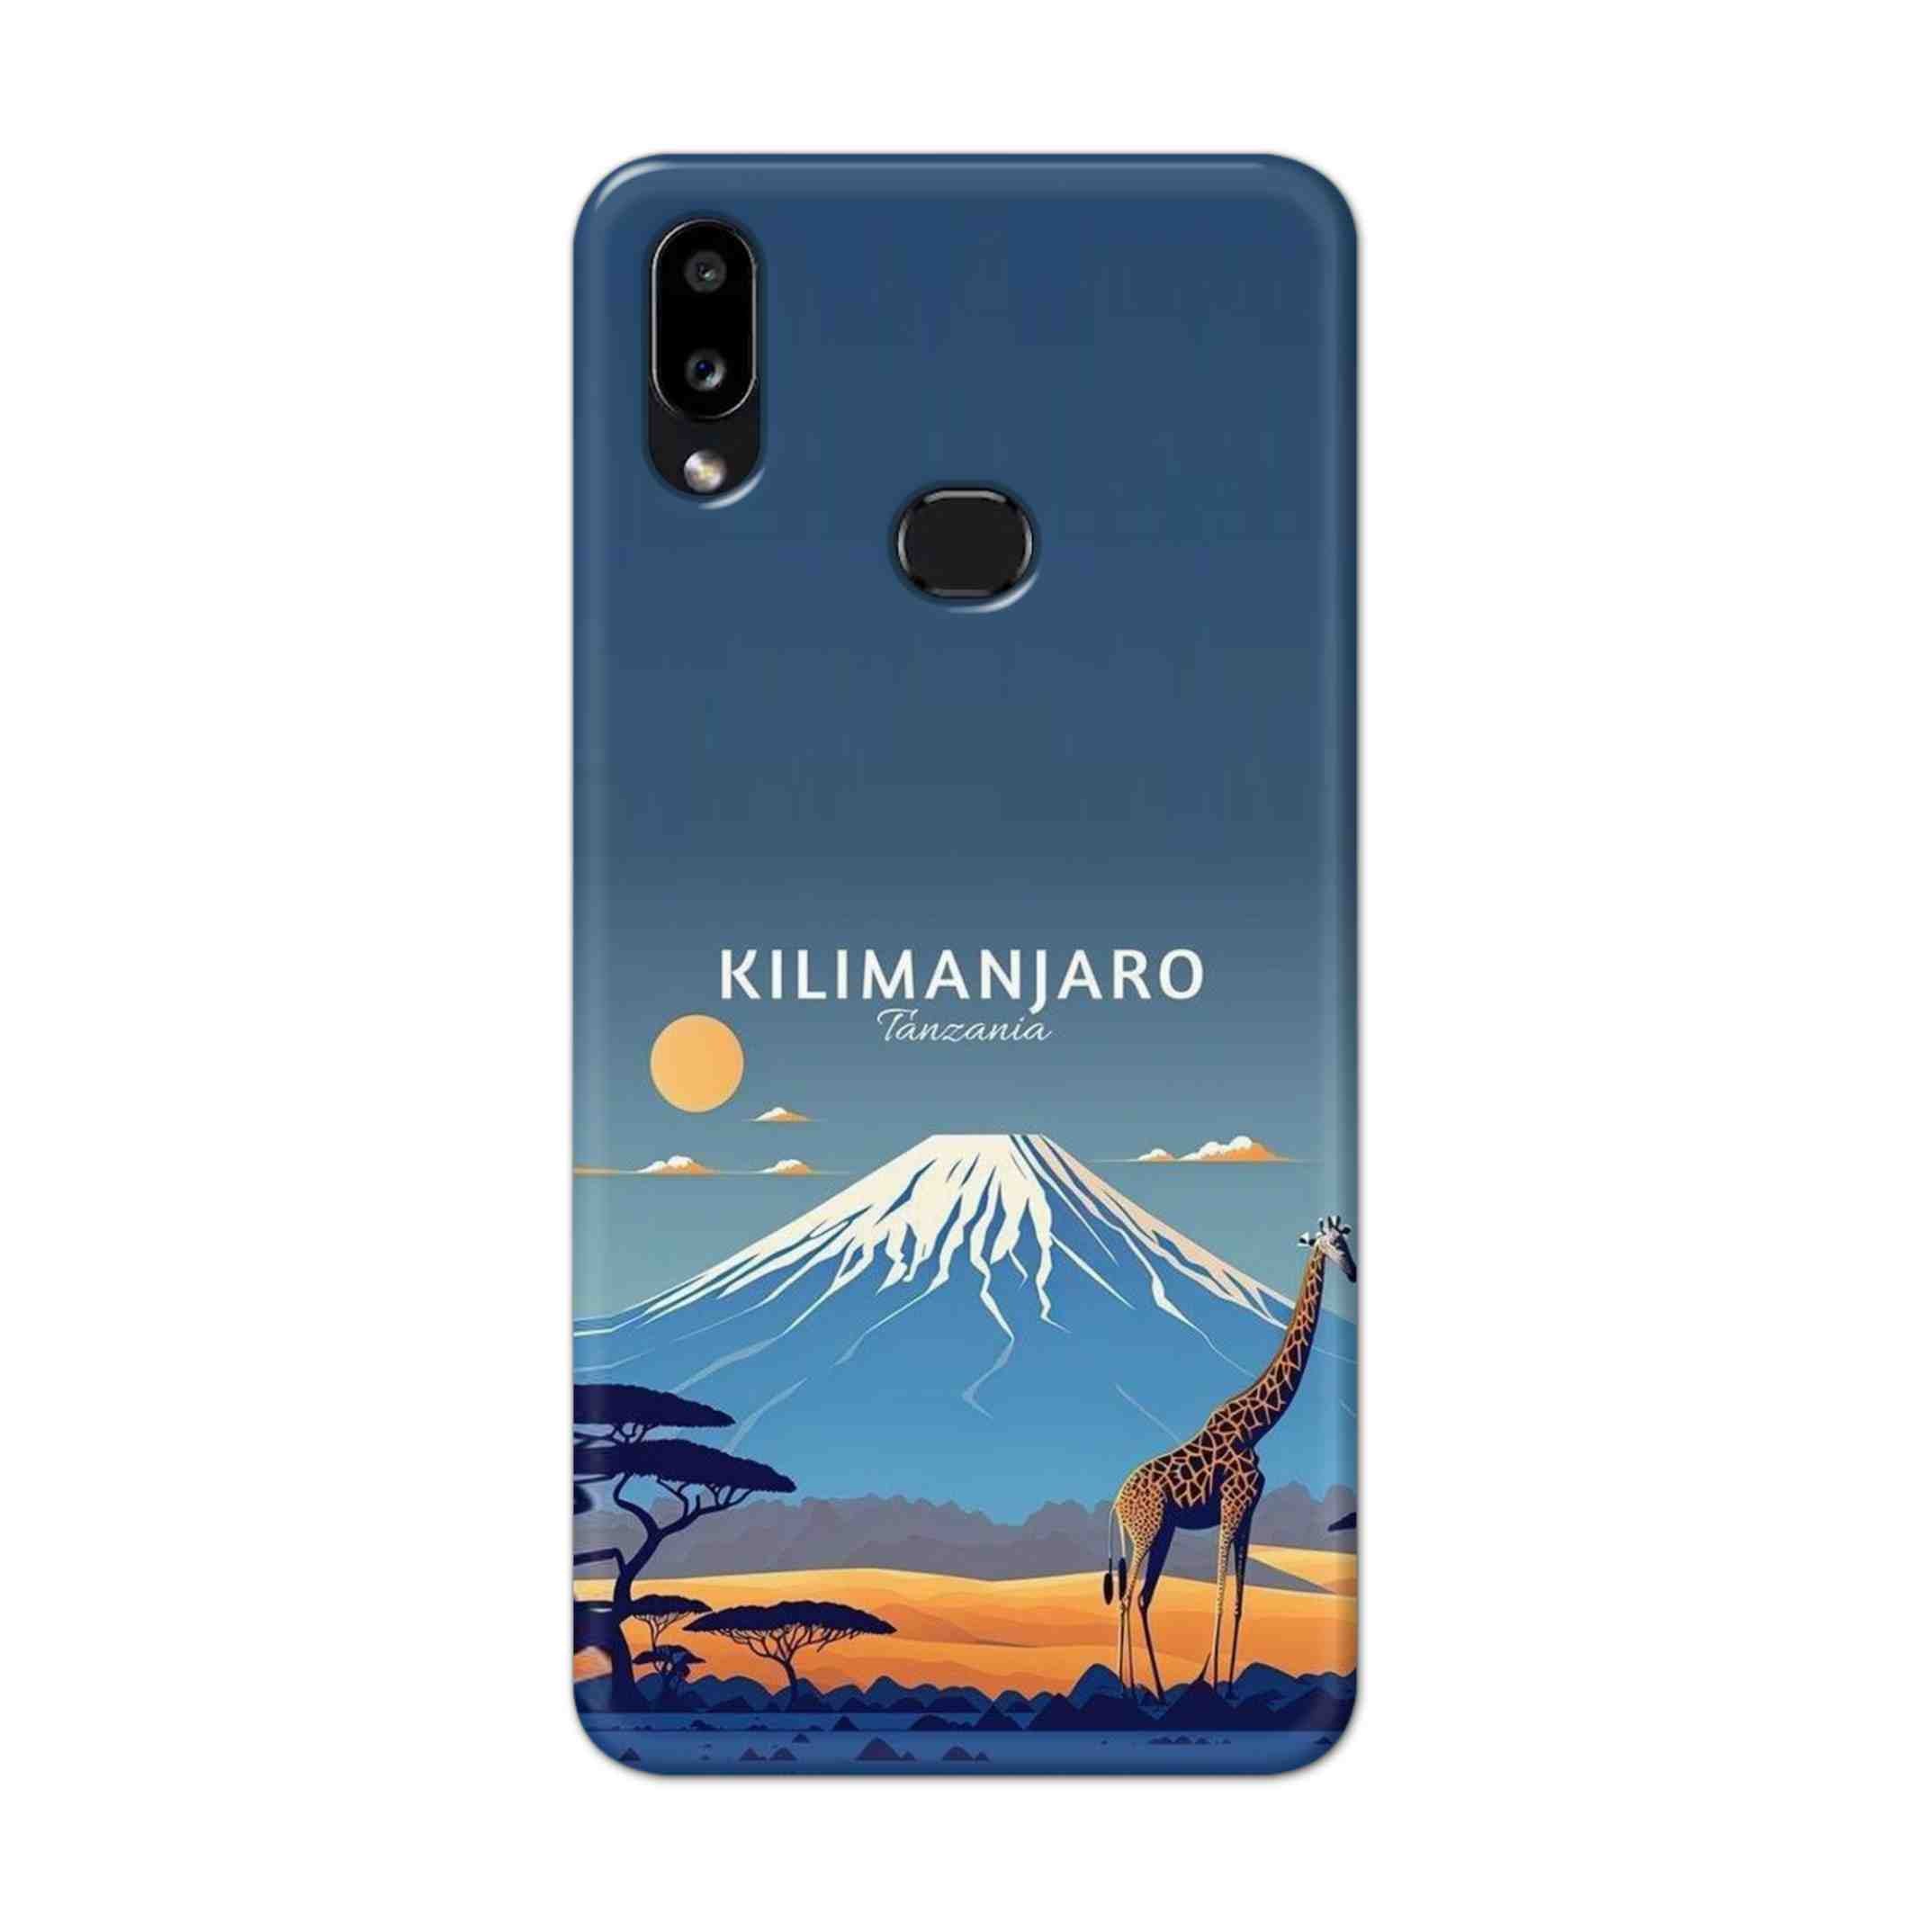 Buy Kilimanjaro Hard Back Mobile Phone Case Cover For Samsung Galaxy M01s Online